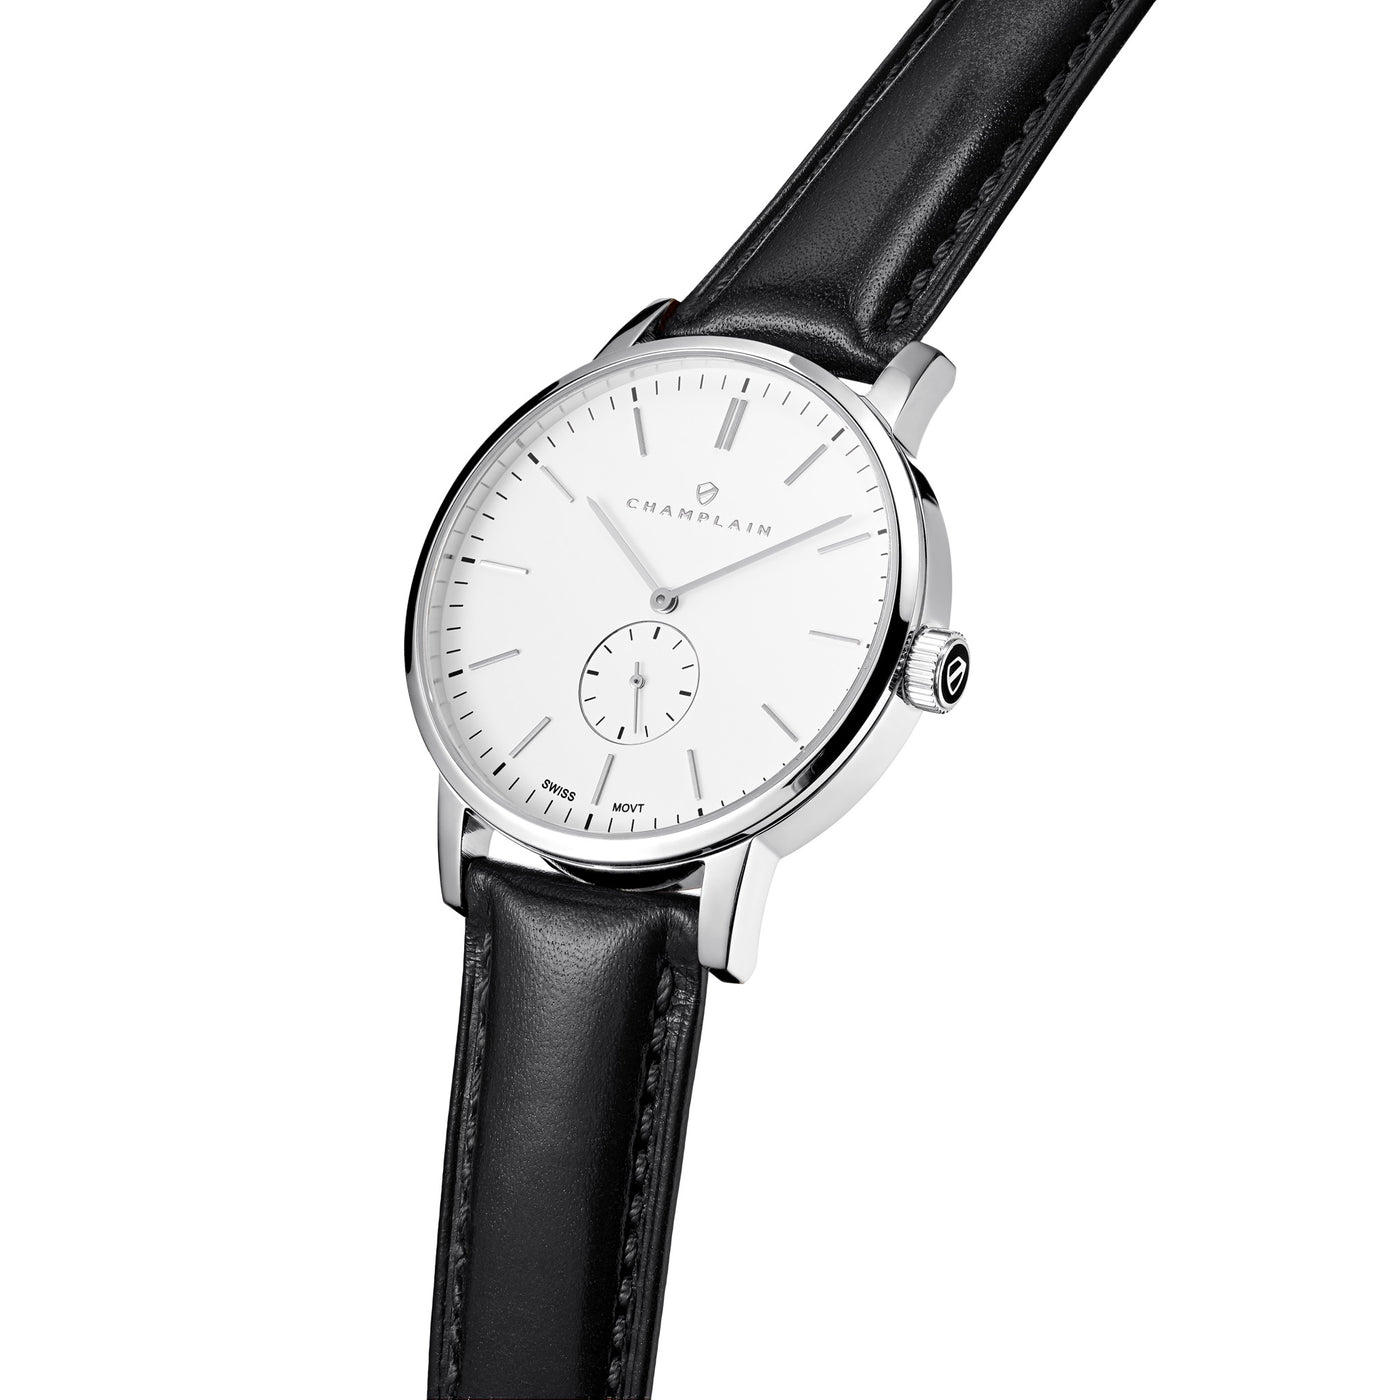 Silver/White - Black Governor Watch by Champlain